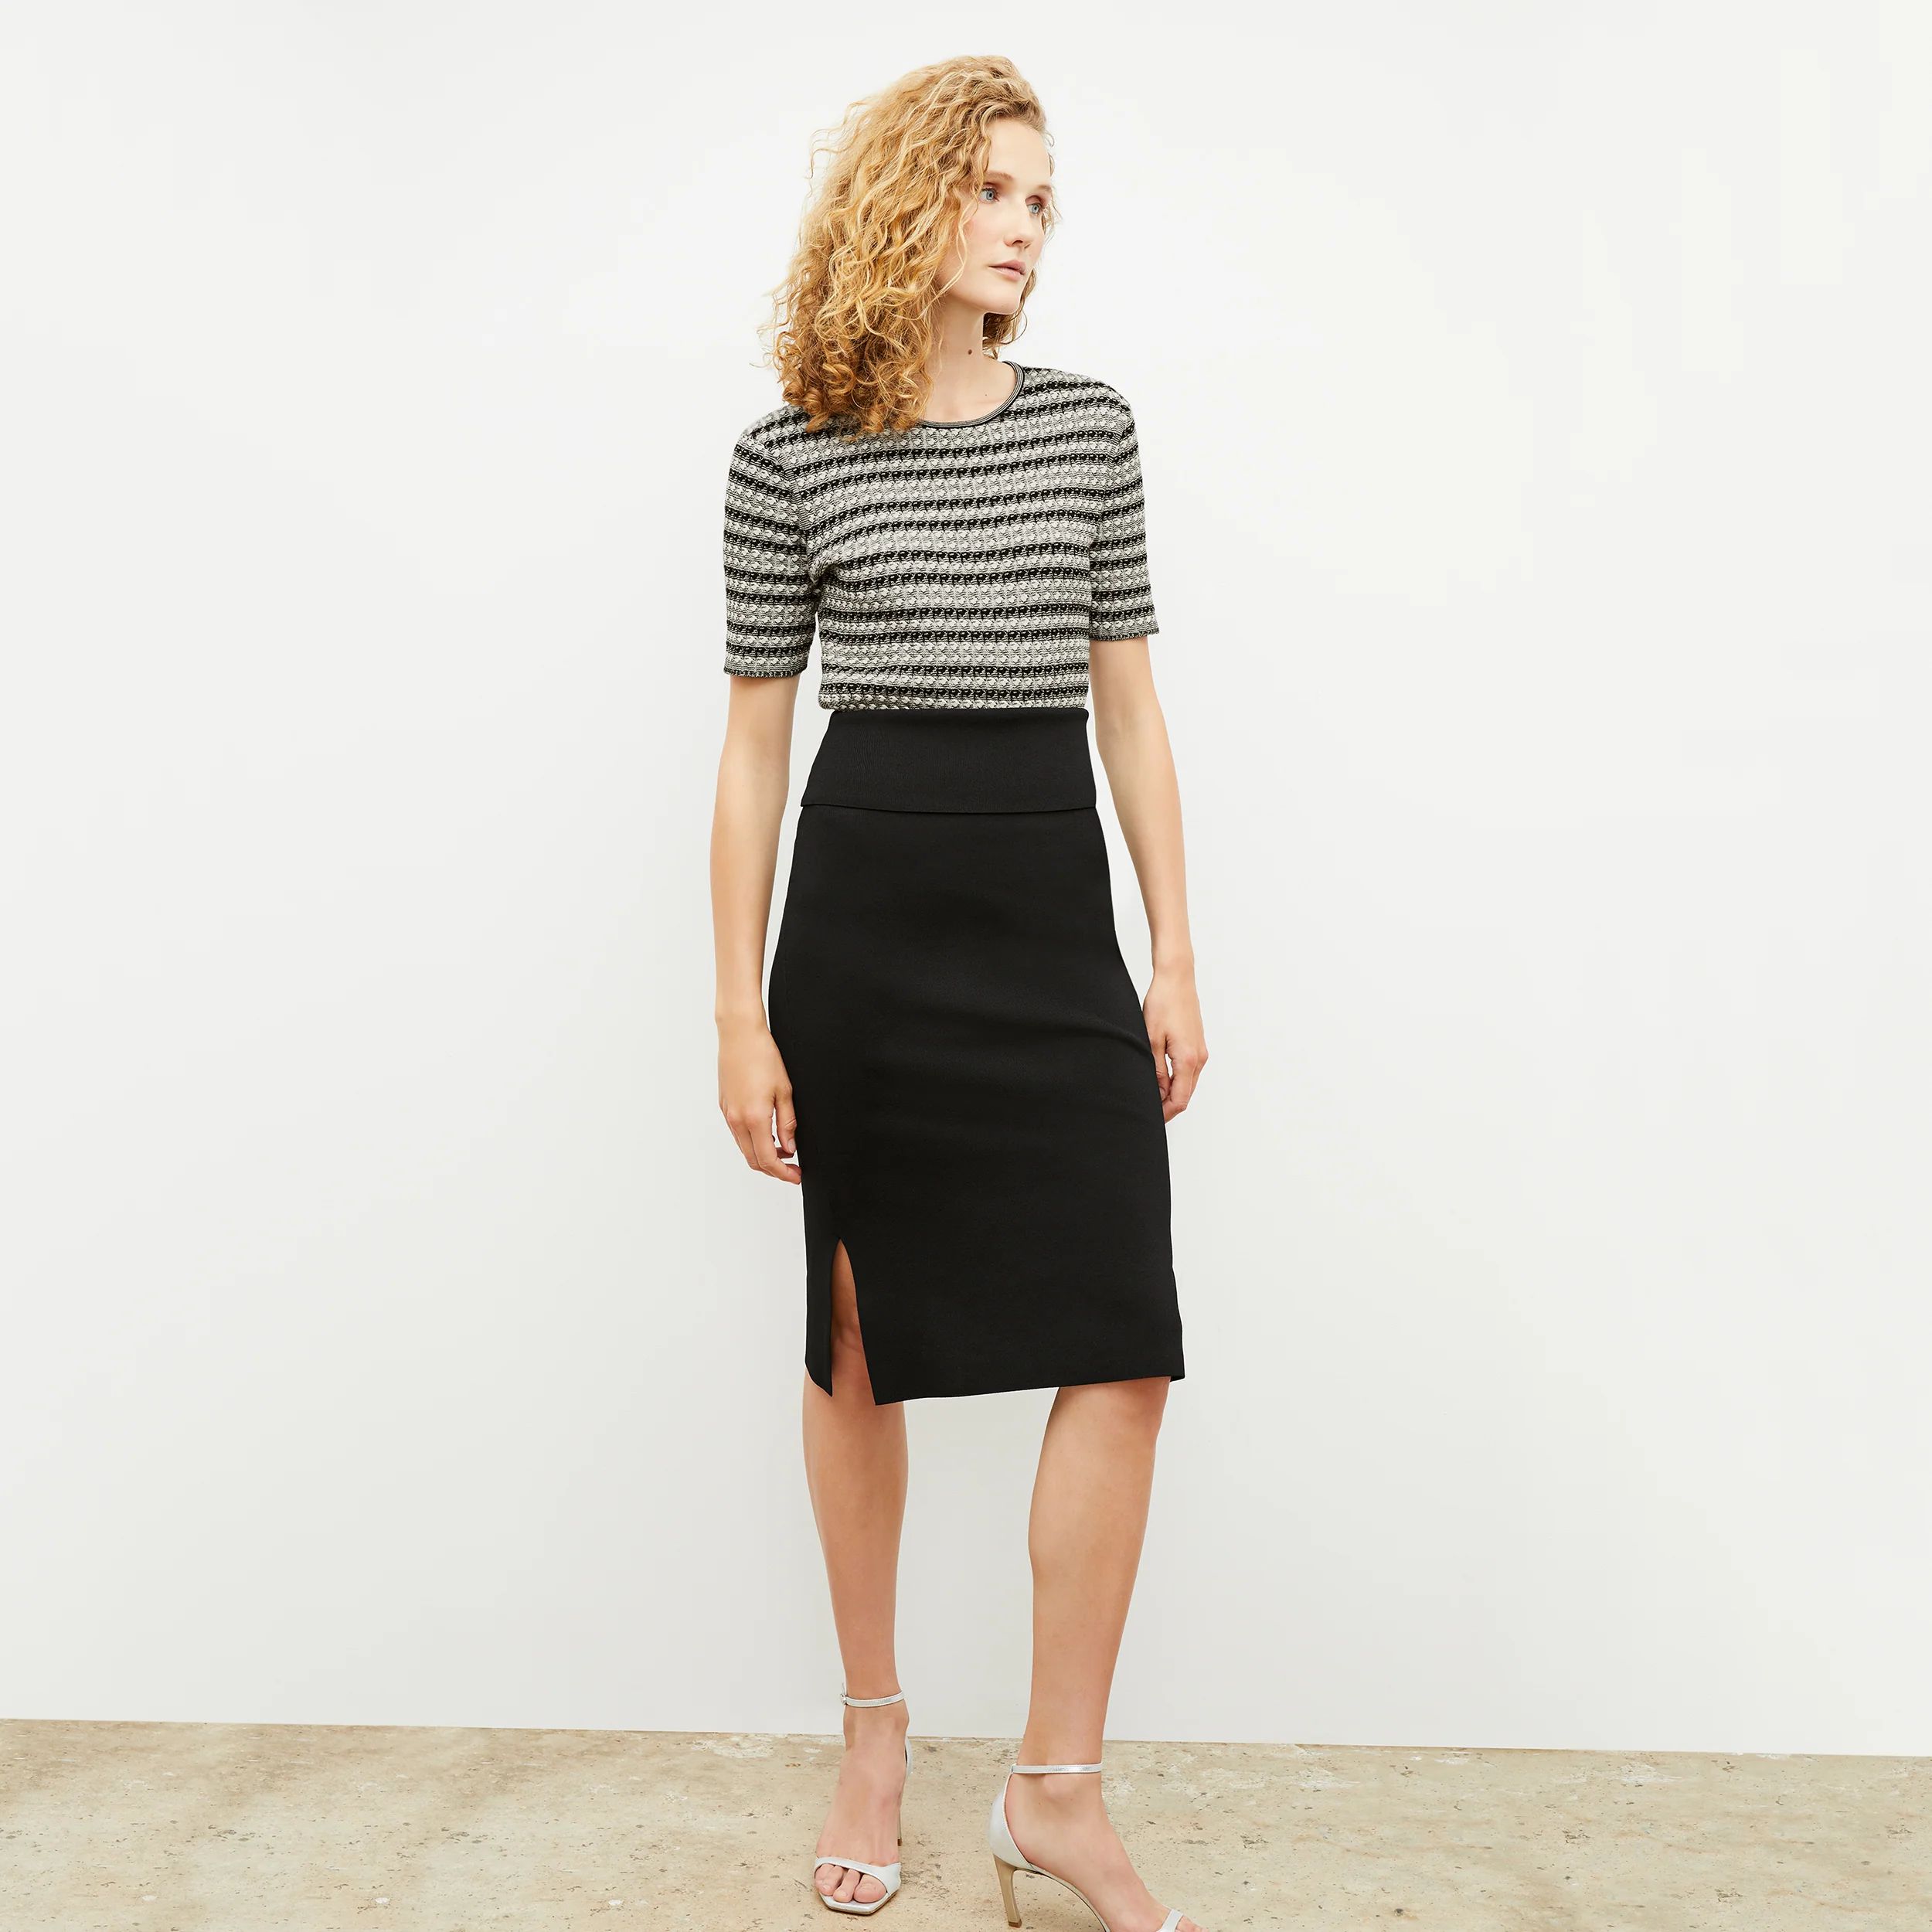 The Charli Top - Cable Stripe | MM LaFleur